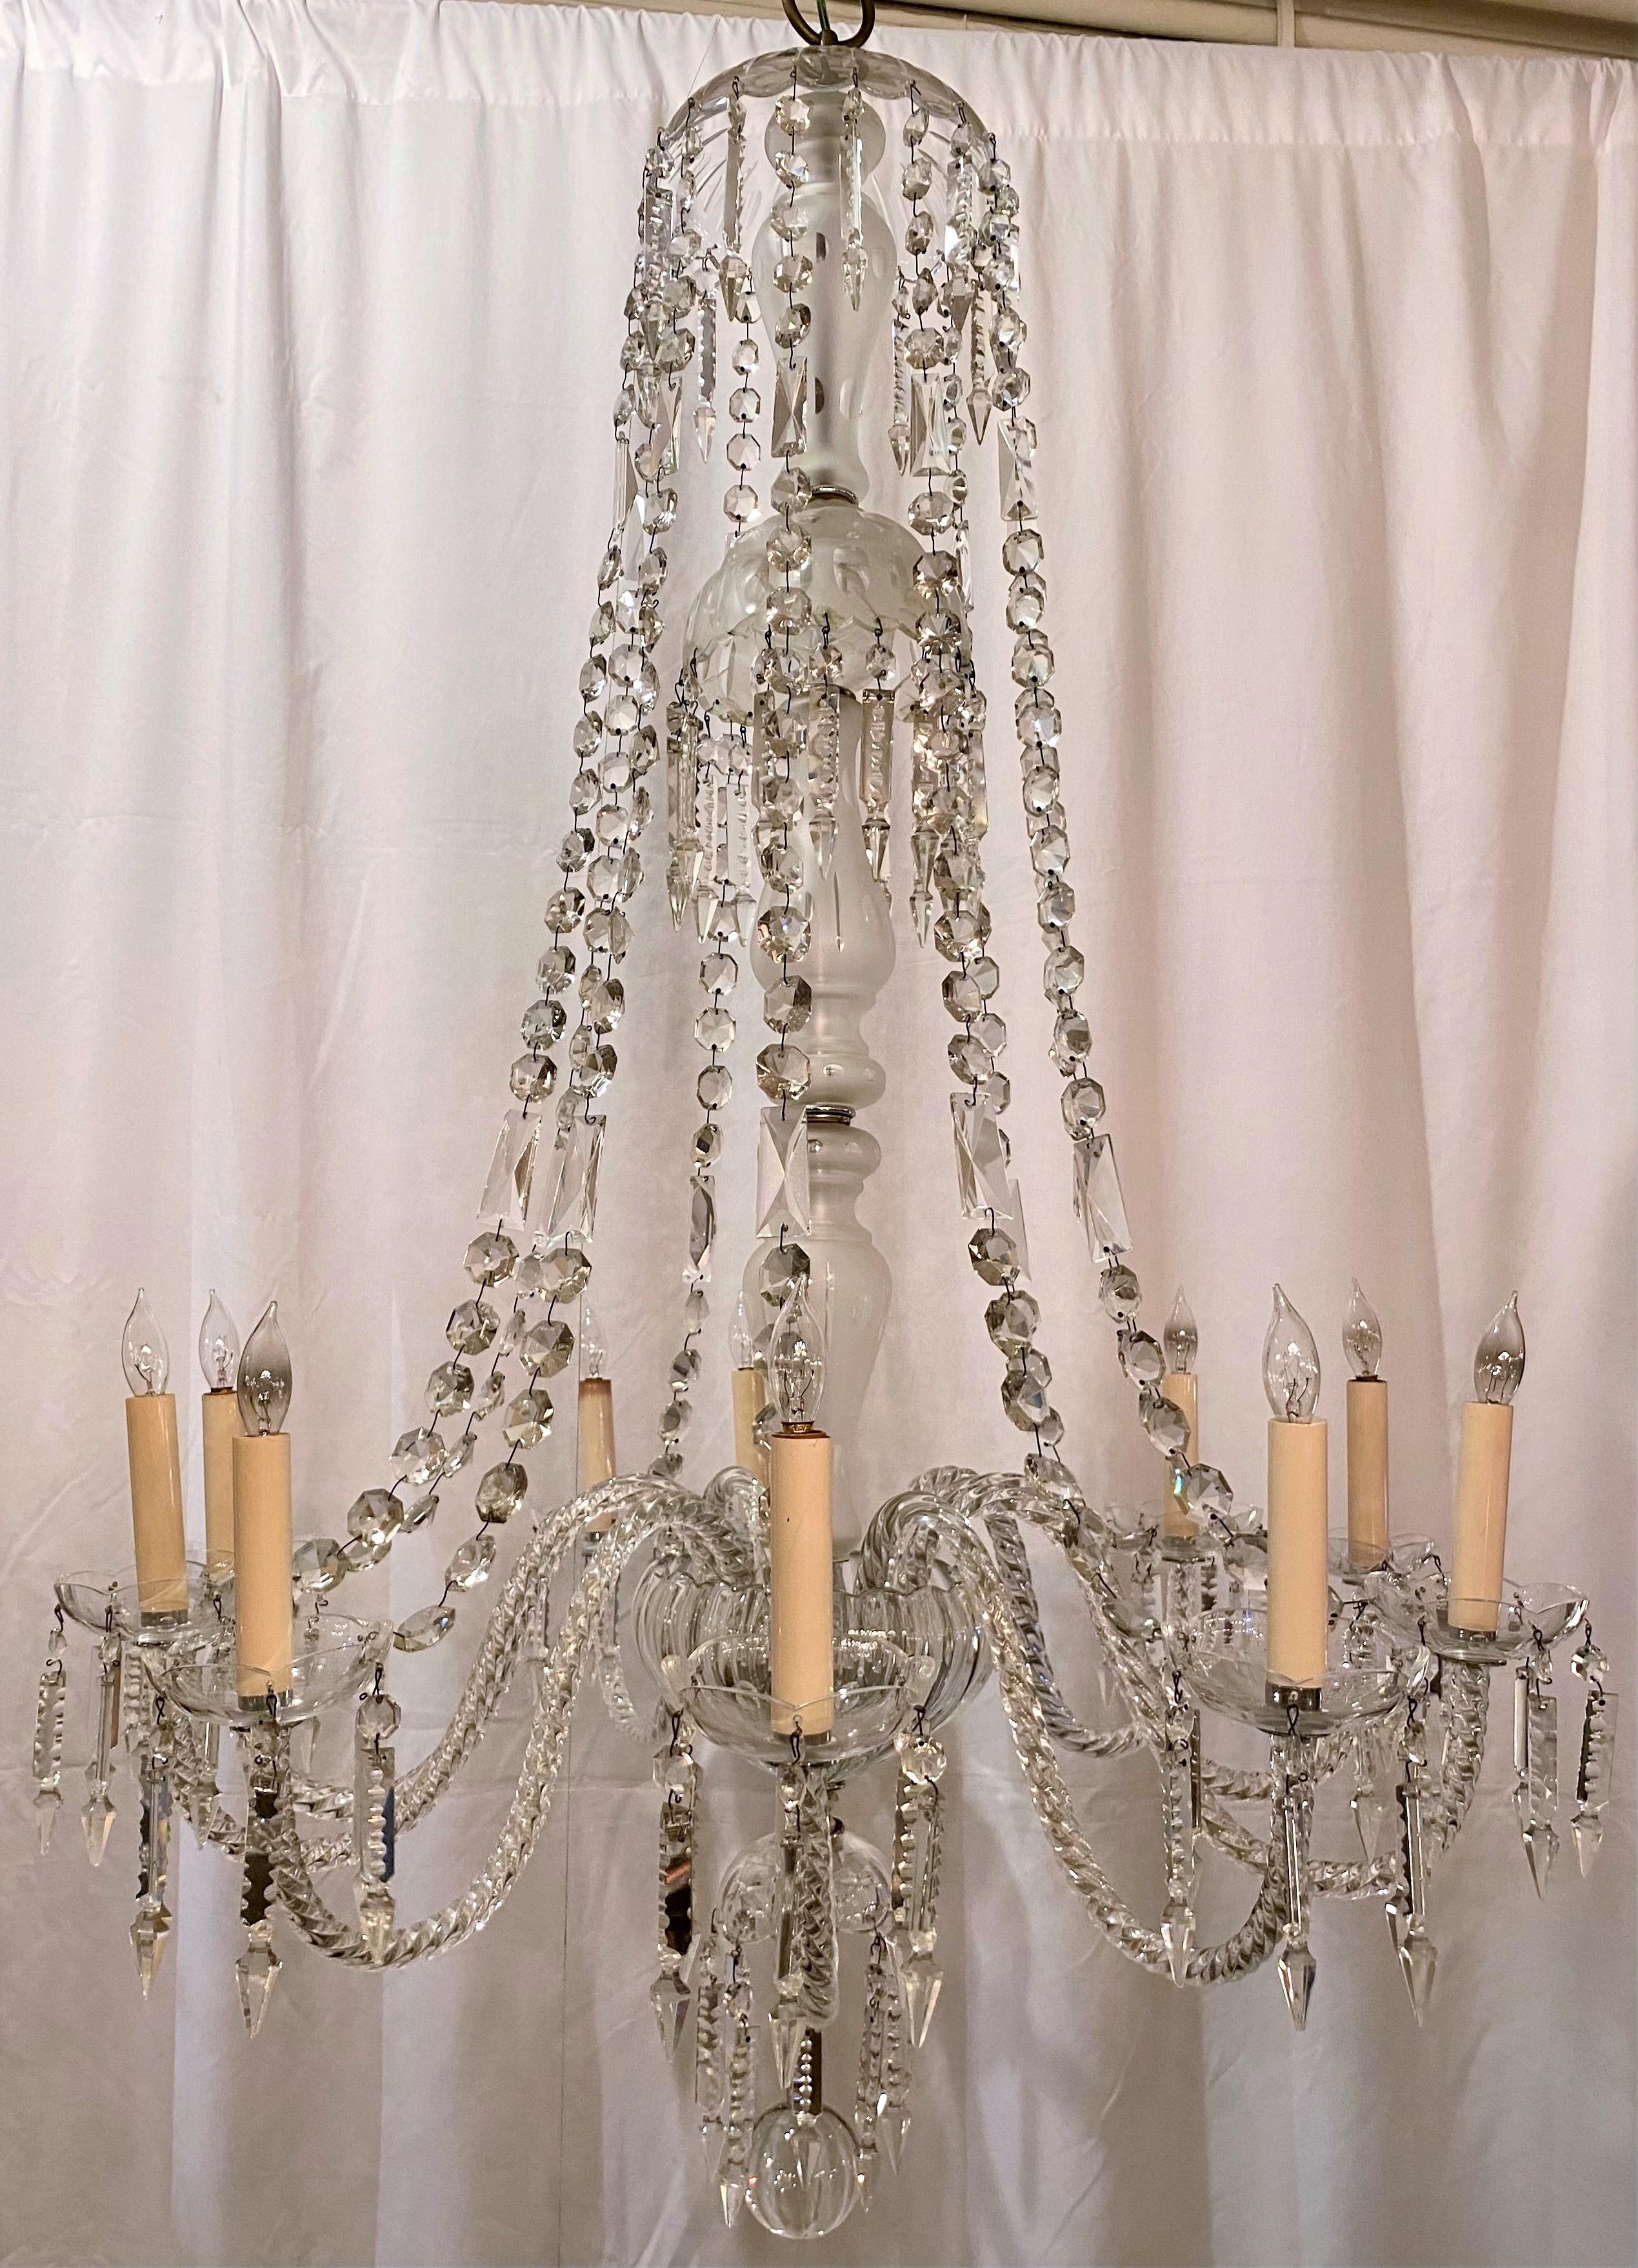 Pair Antique Early 19th Century English Crystal Chandeliers 1